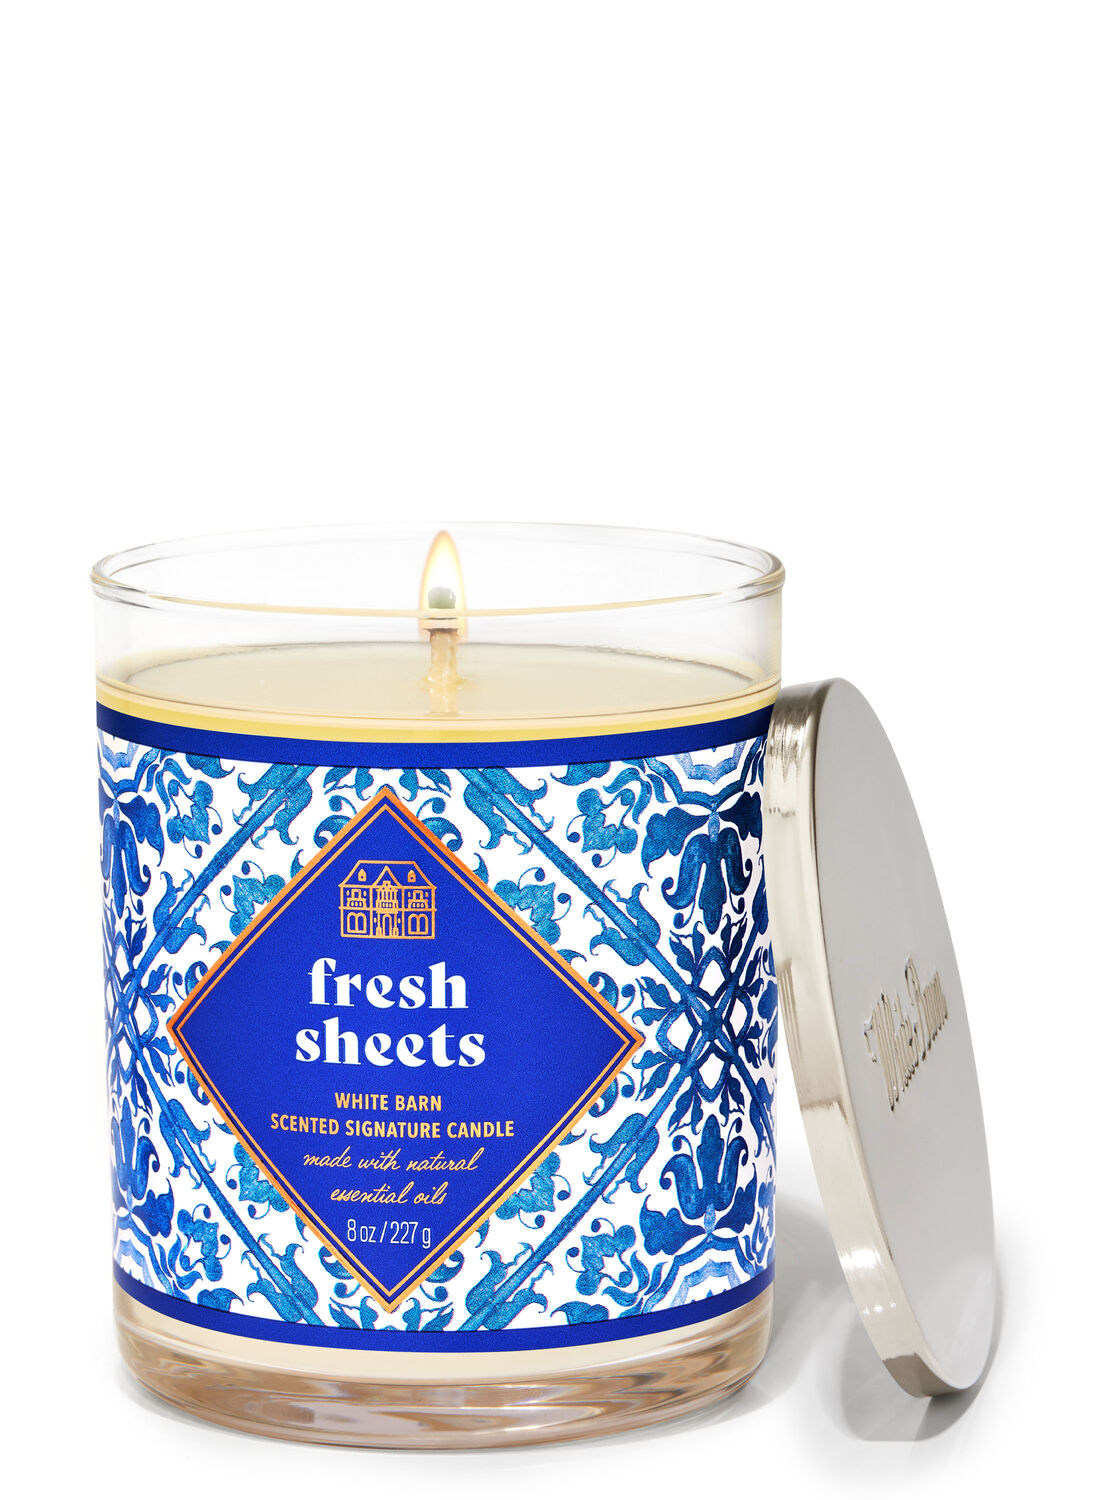 FRESH LINEN - Paisley Candle and Home